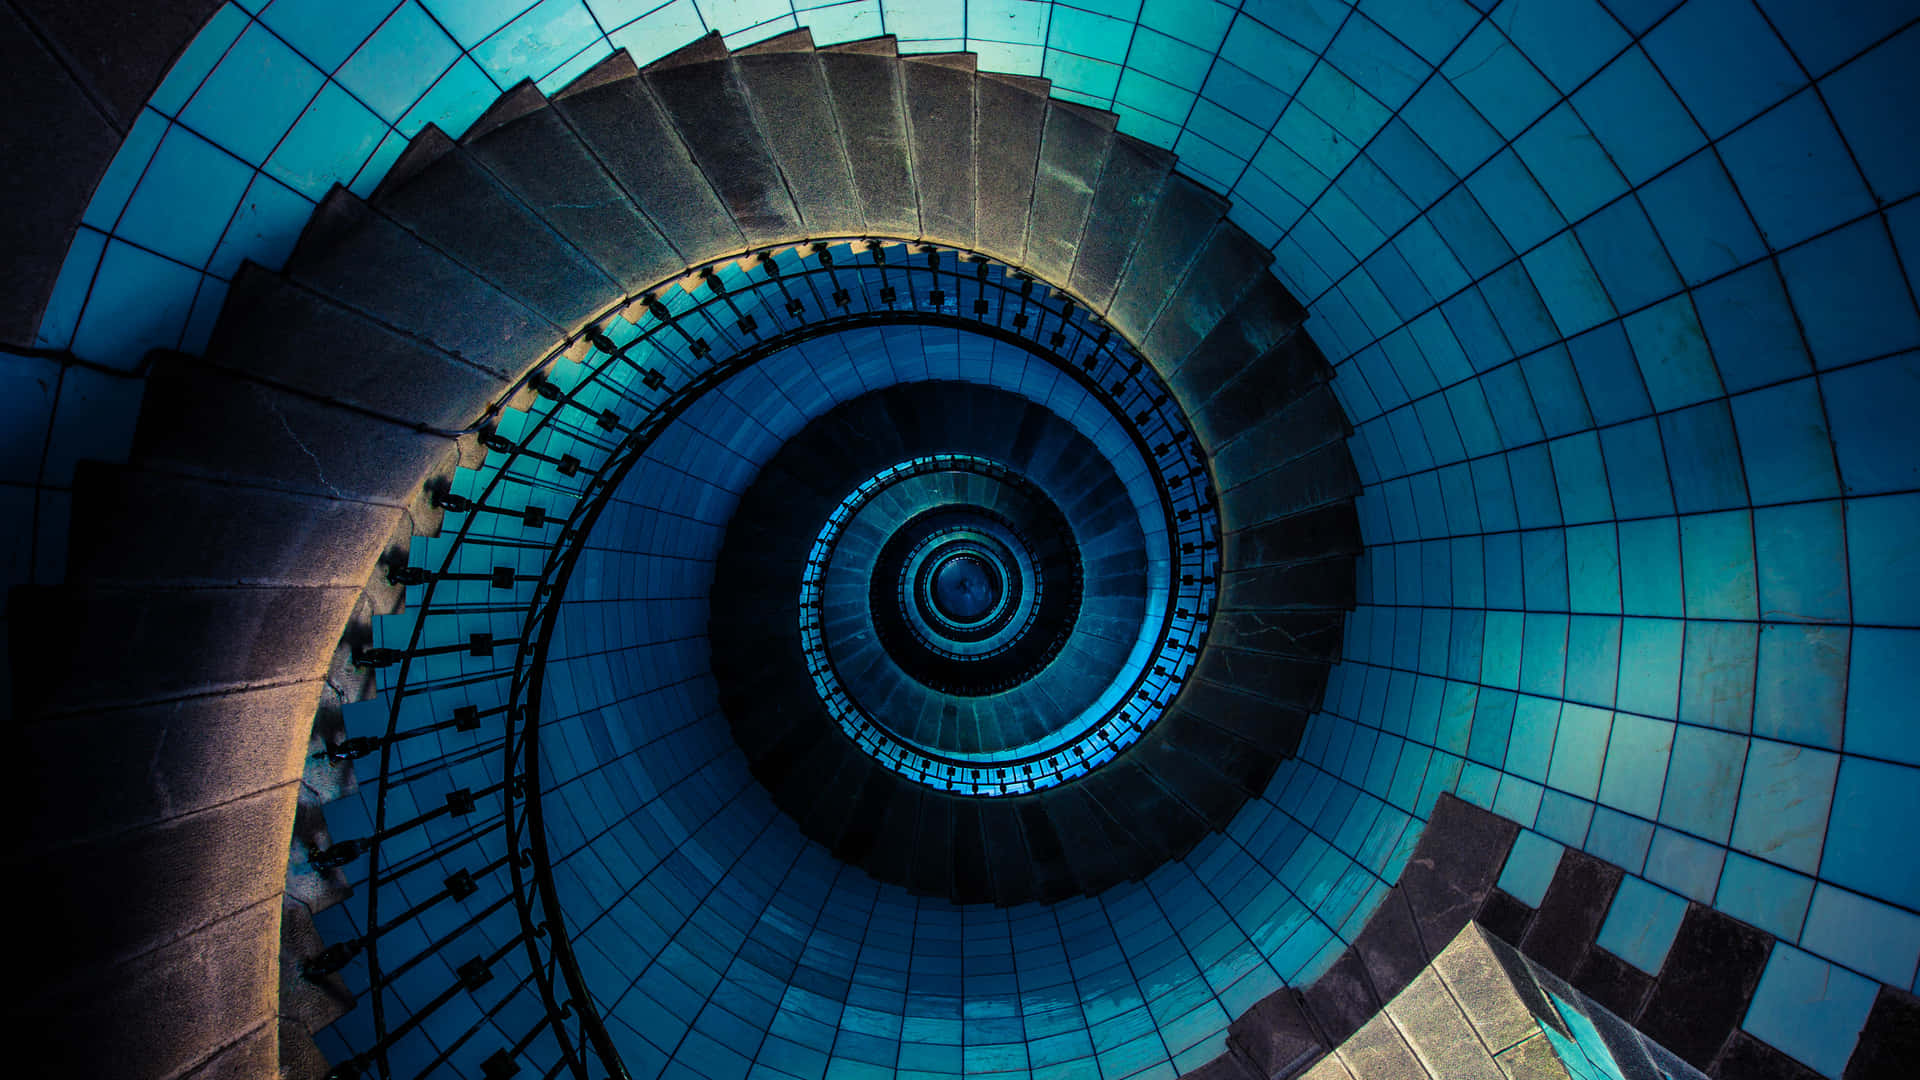 A Spiral Staircase With Blue Lights